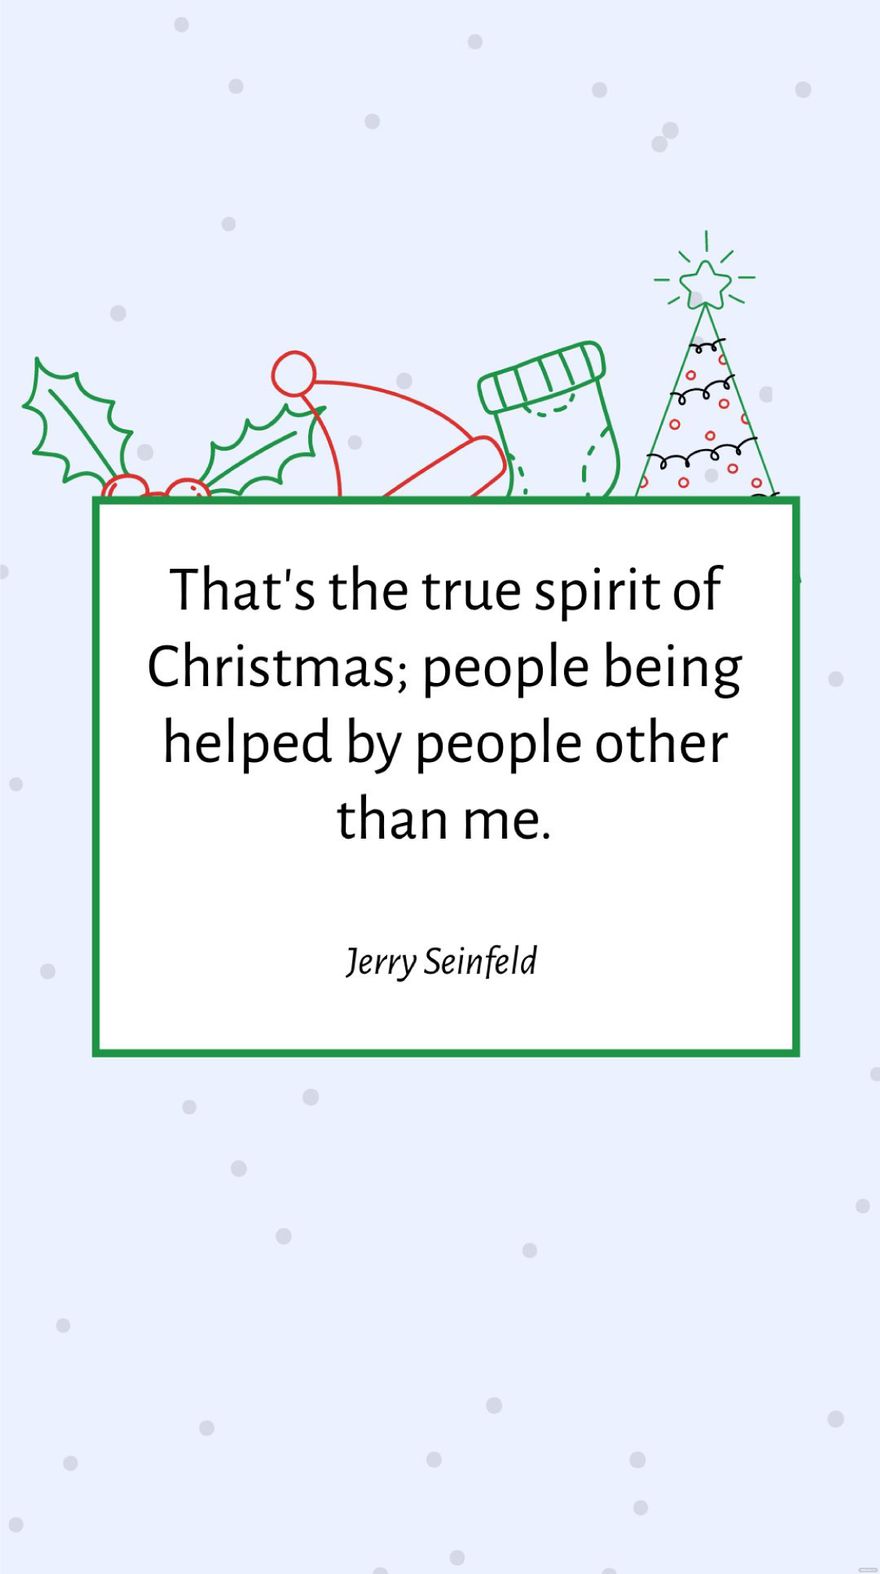 Jerry Seinfeld - That's the true spirit of Christmas; people being helped by people other than me. in JPG